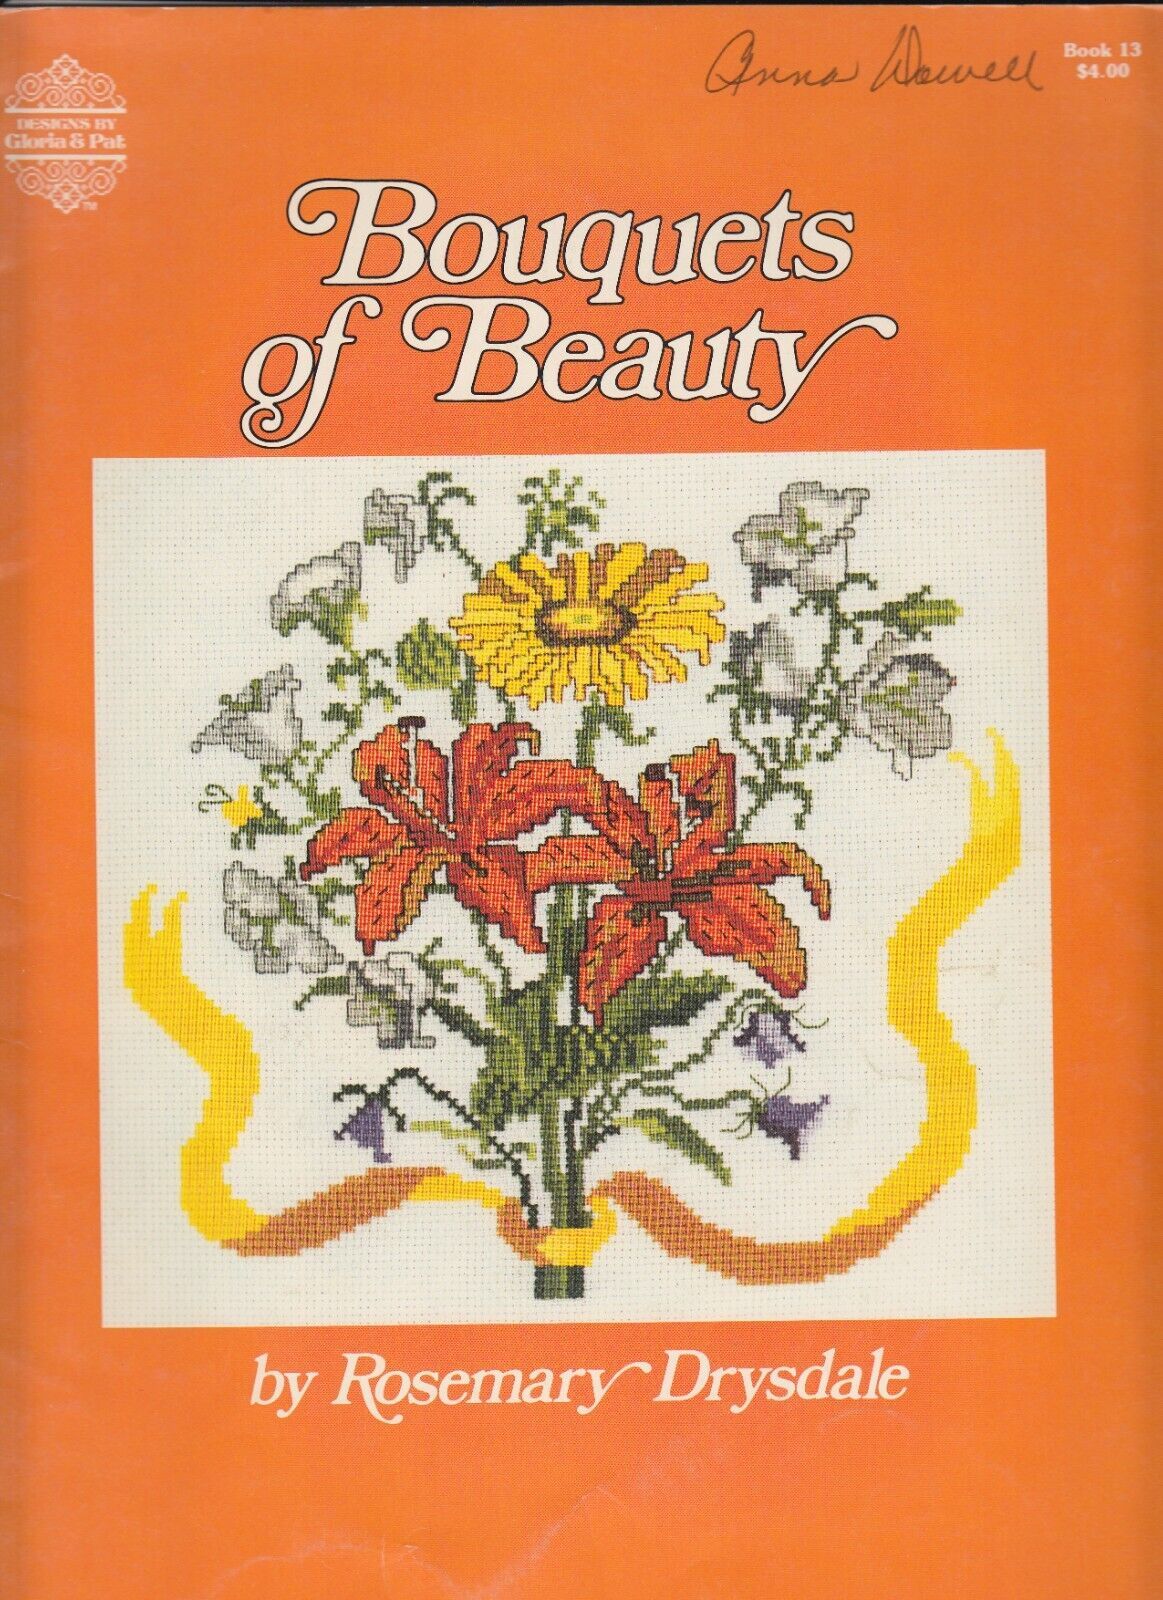 Primary image for Bouquets of Beauty Cross Stitch Pattern Book 13 By Rosemary Drysdale Flowers